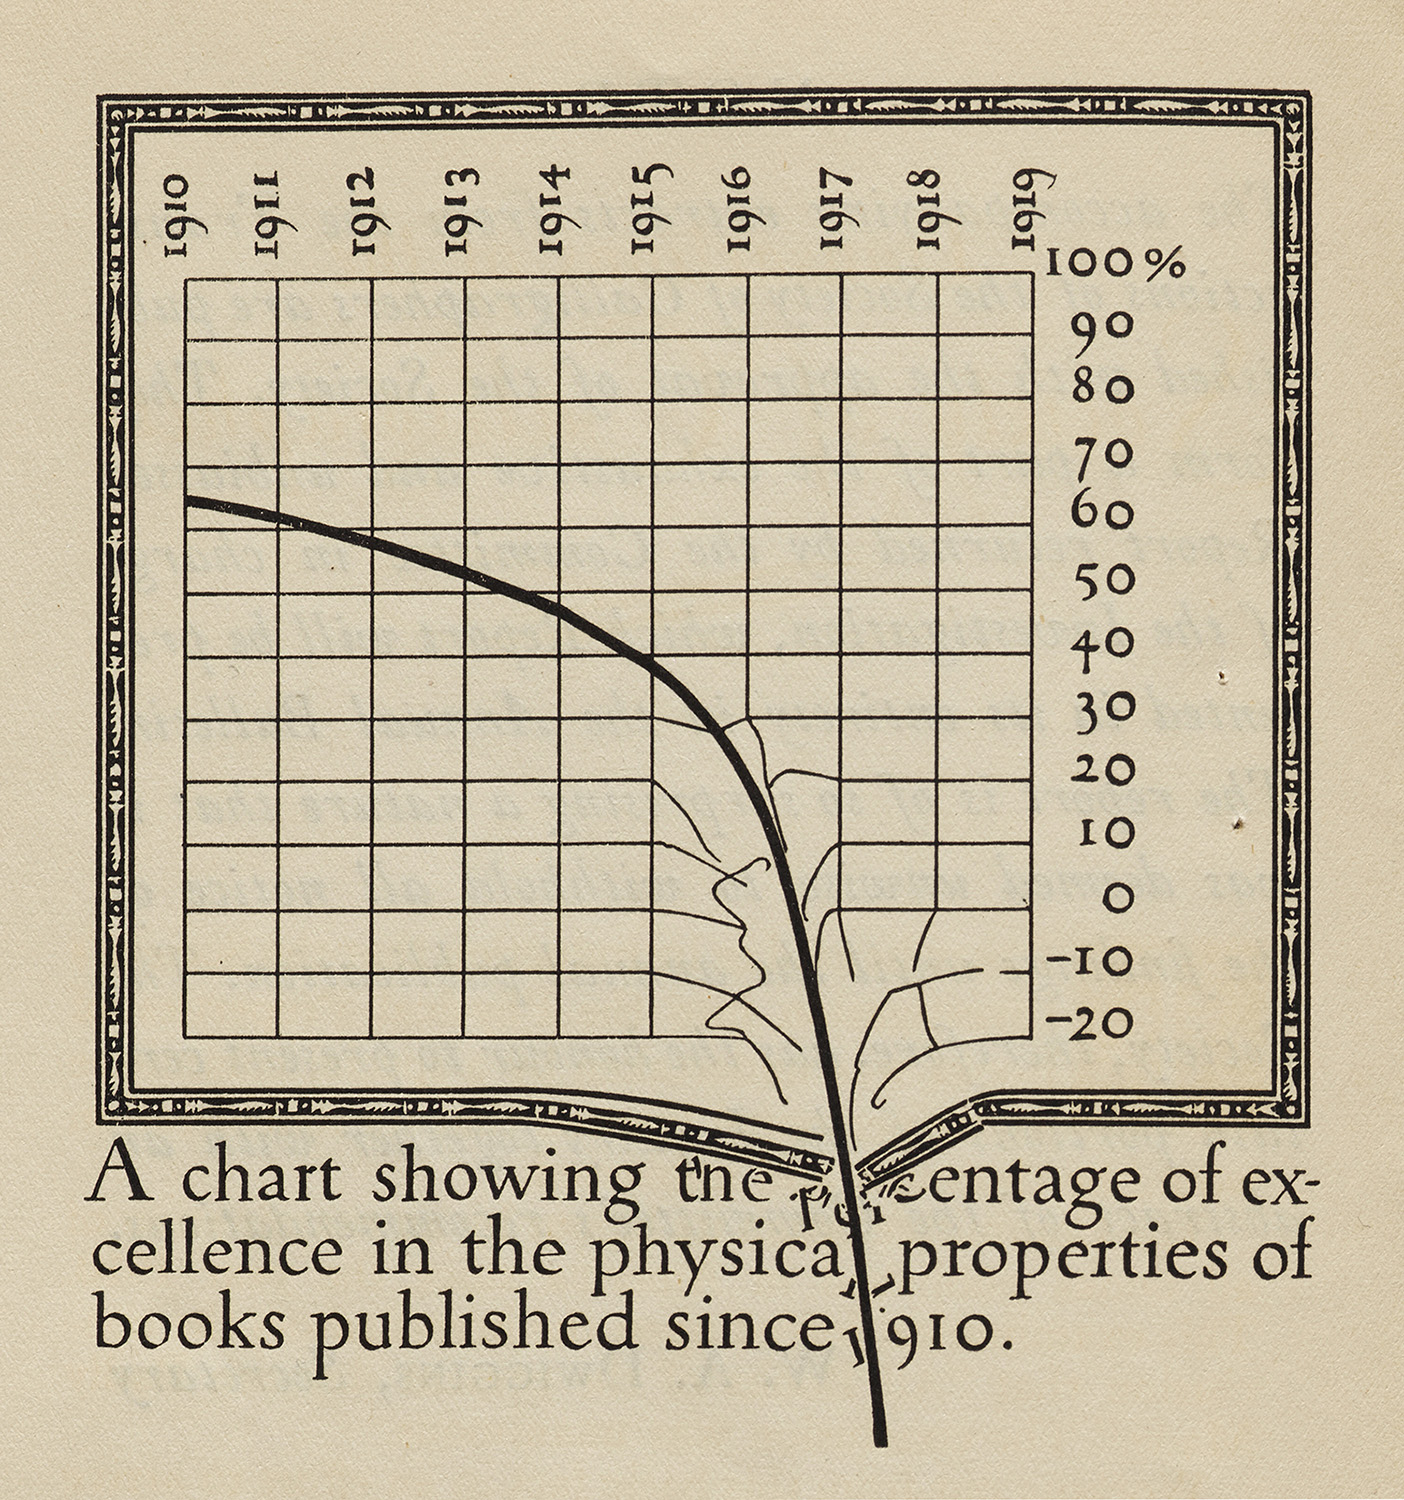 Infographic by Dwiggins